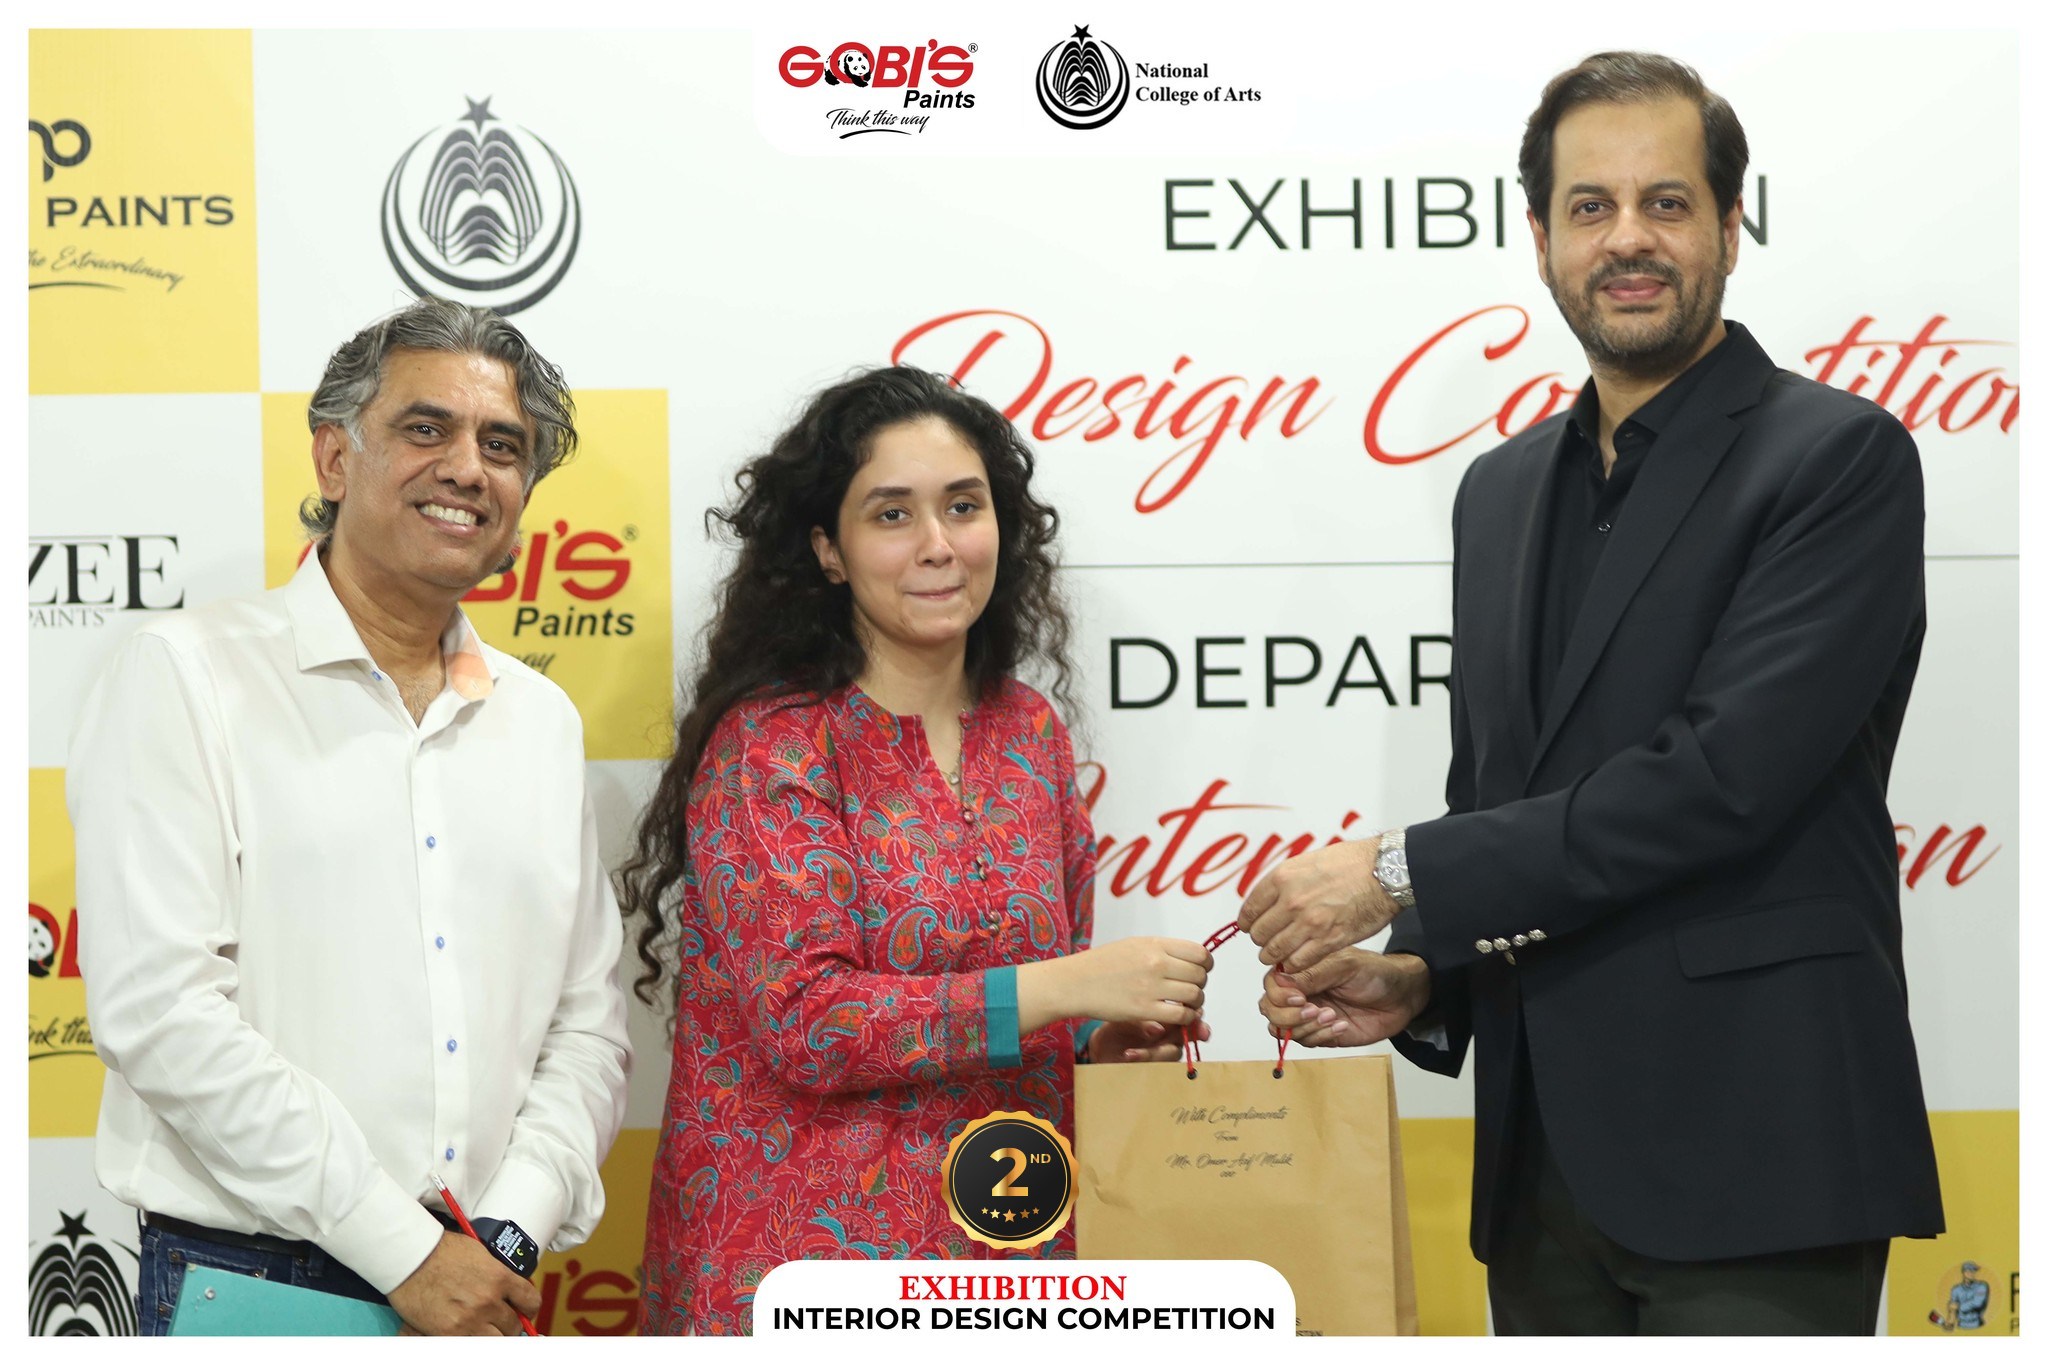 The National College of Arts (NCA) in Lahore, in partnership with Gobis Paints